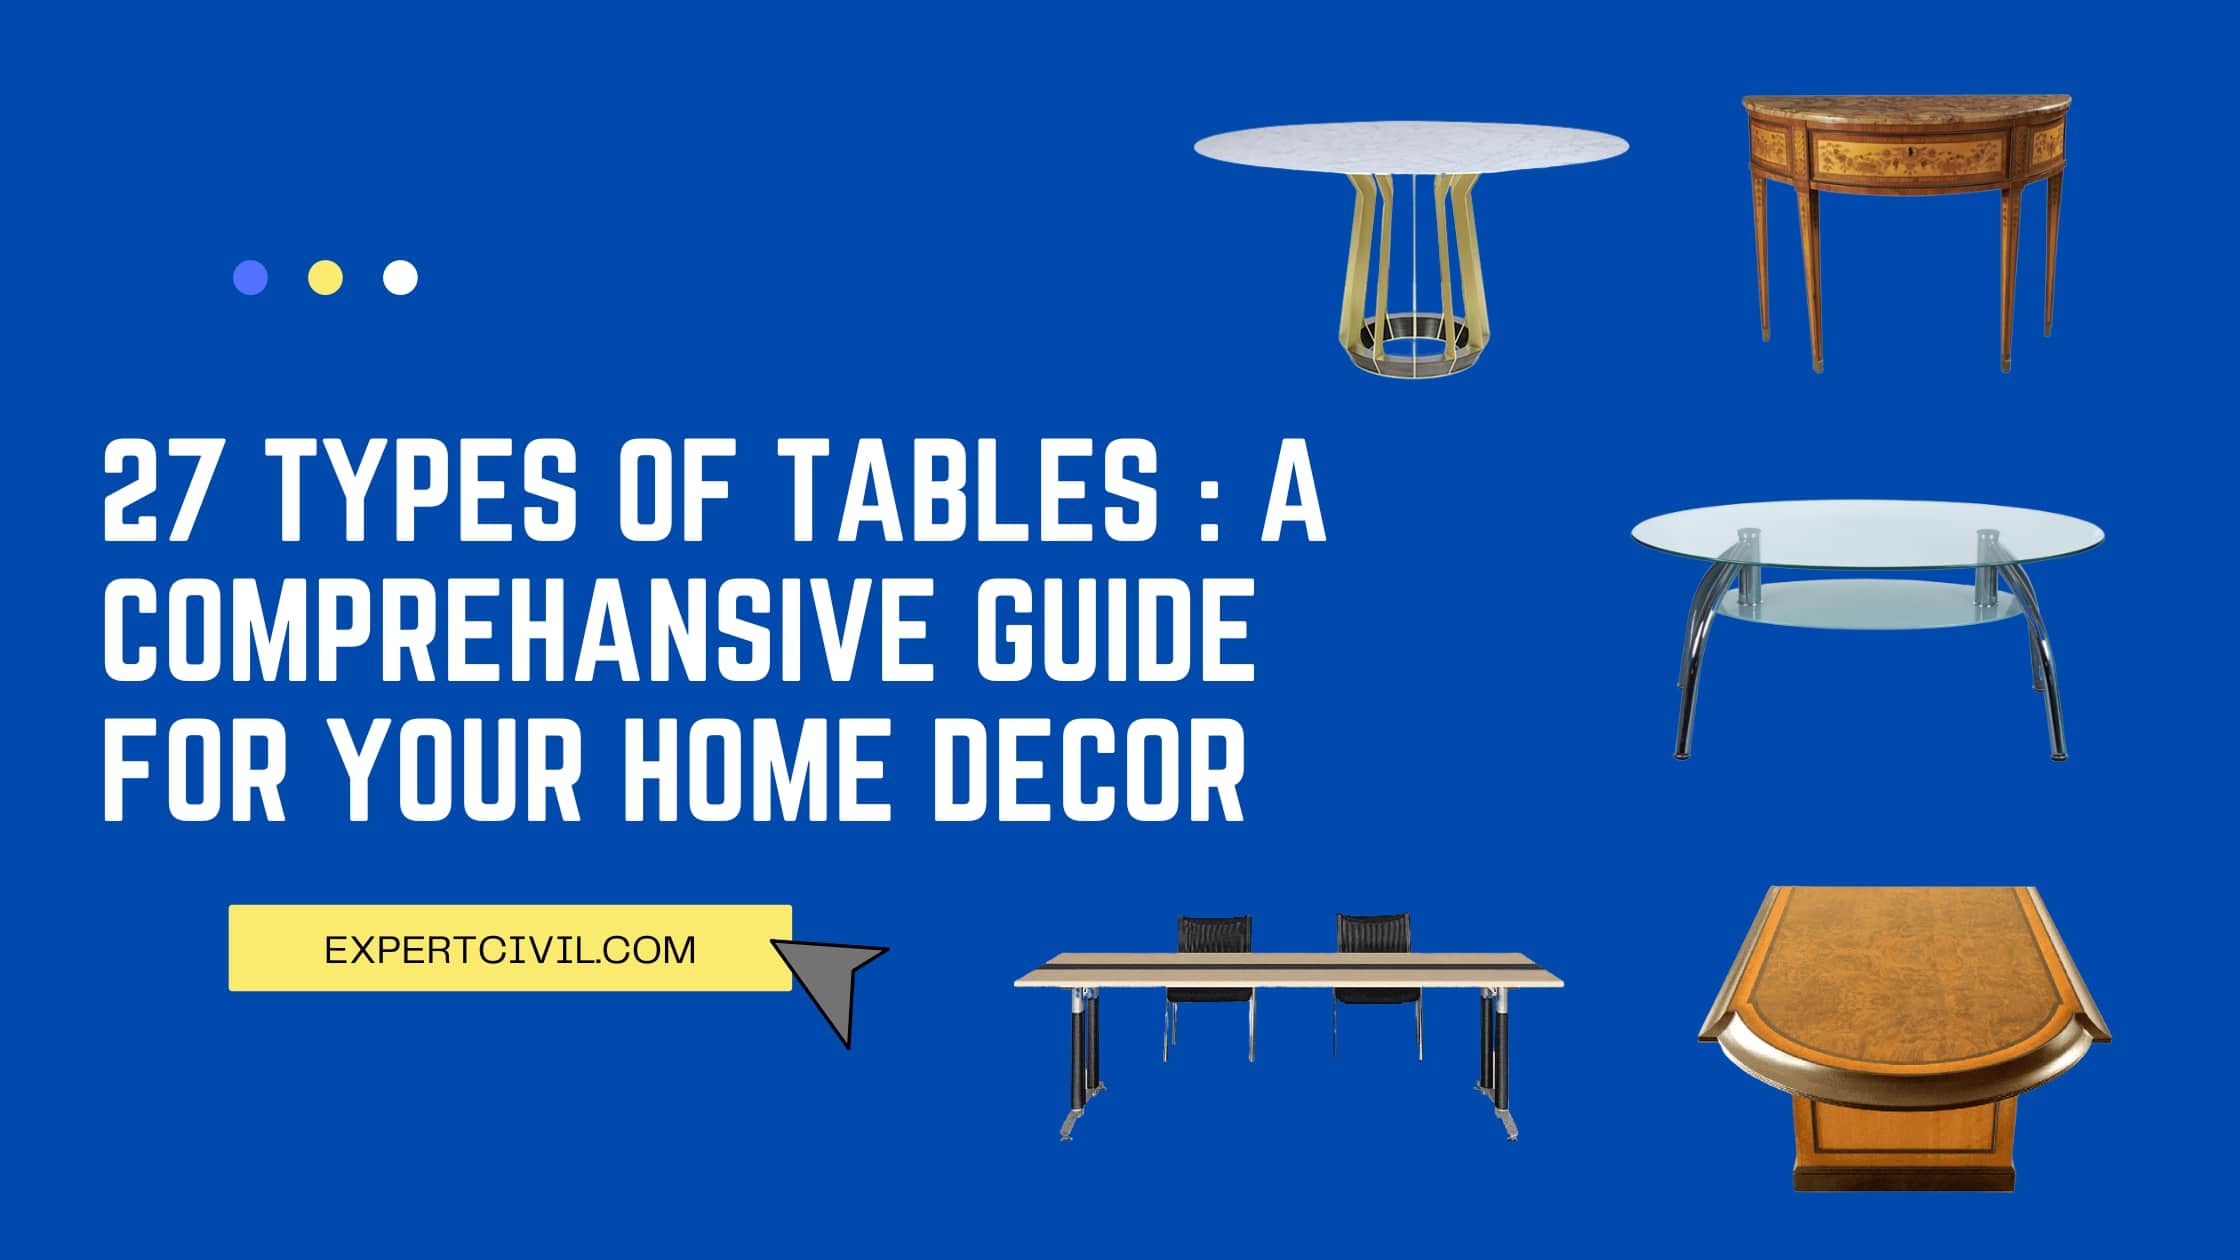 27 Types of tables : A Comprehansive Guide for your Home Decor